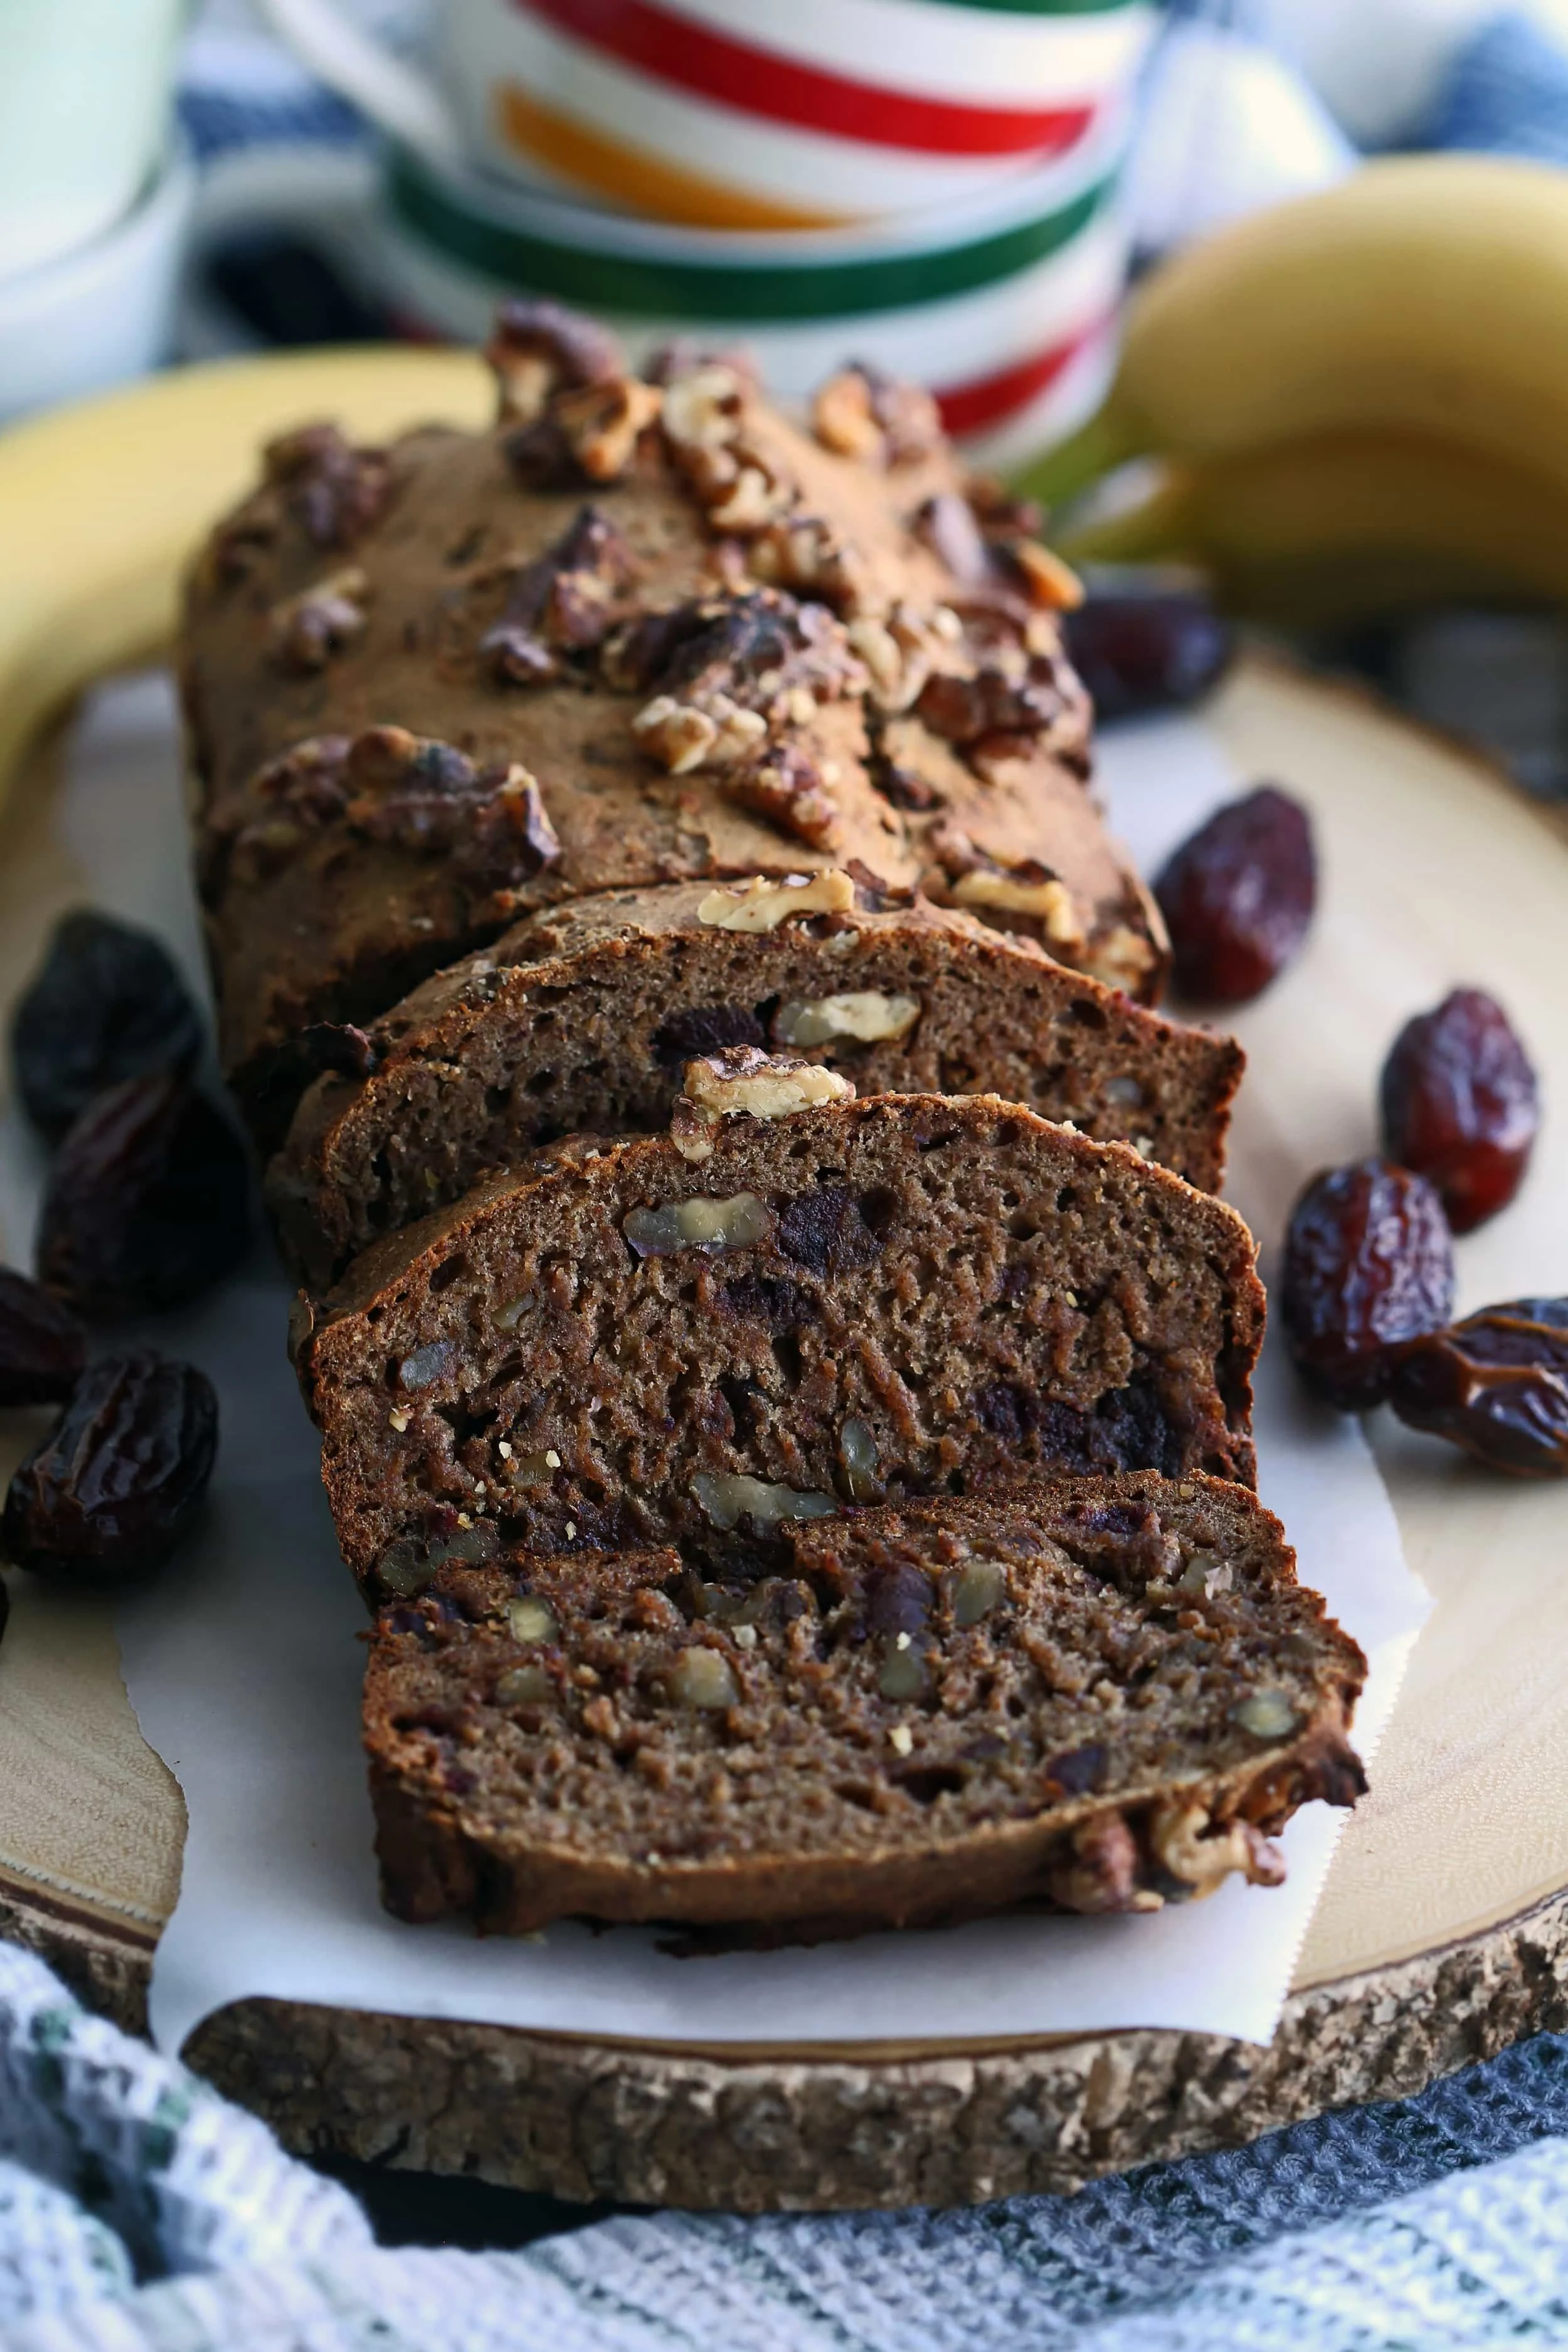 A loaf of banana bread with Medjool dates and walnuts surrounded by fresh bananas and dates on a wooden platter.